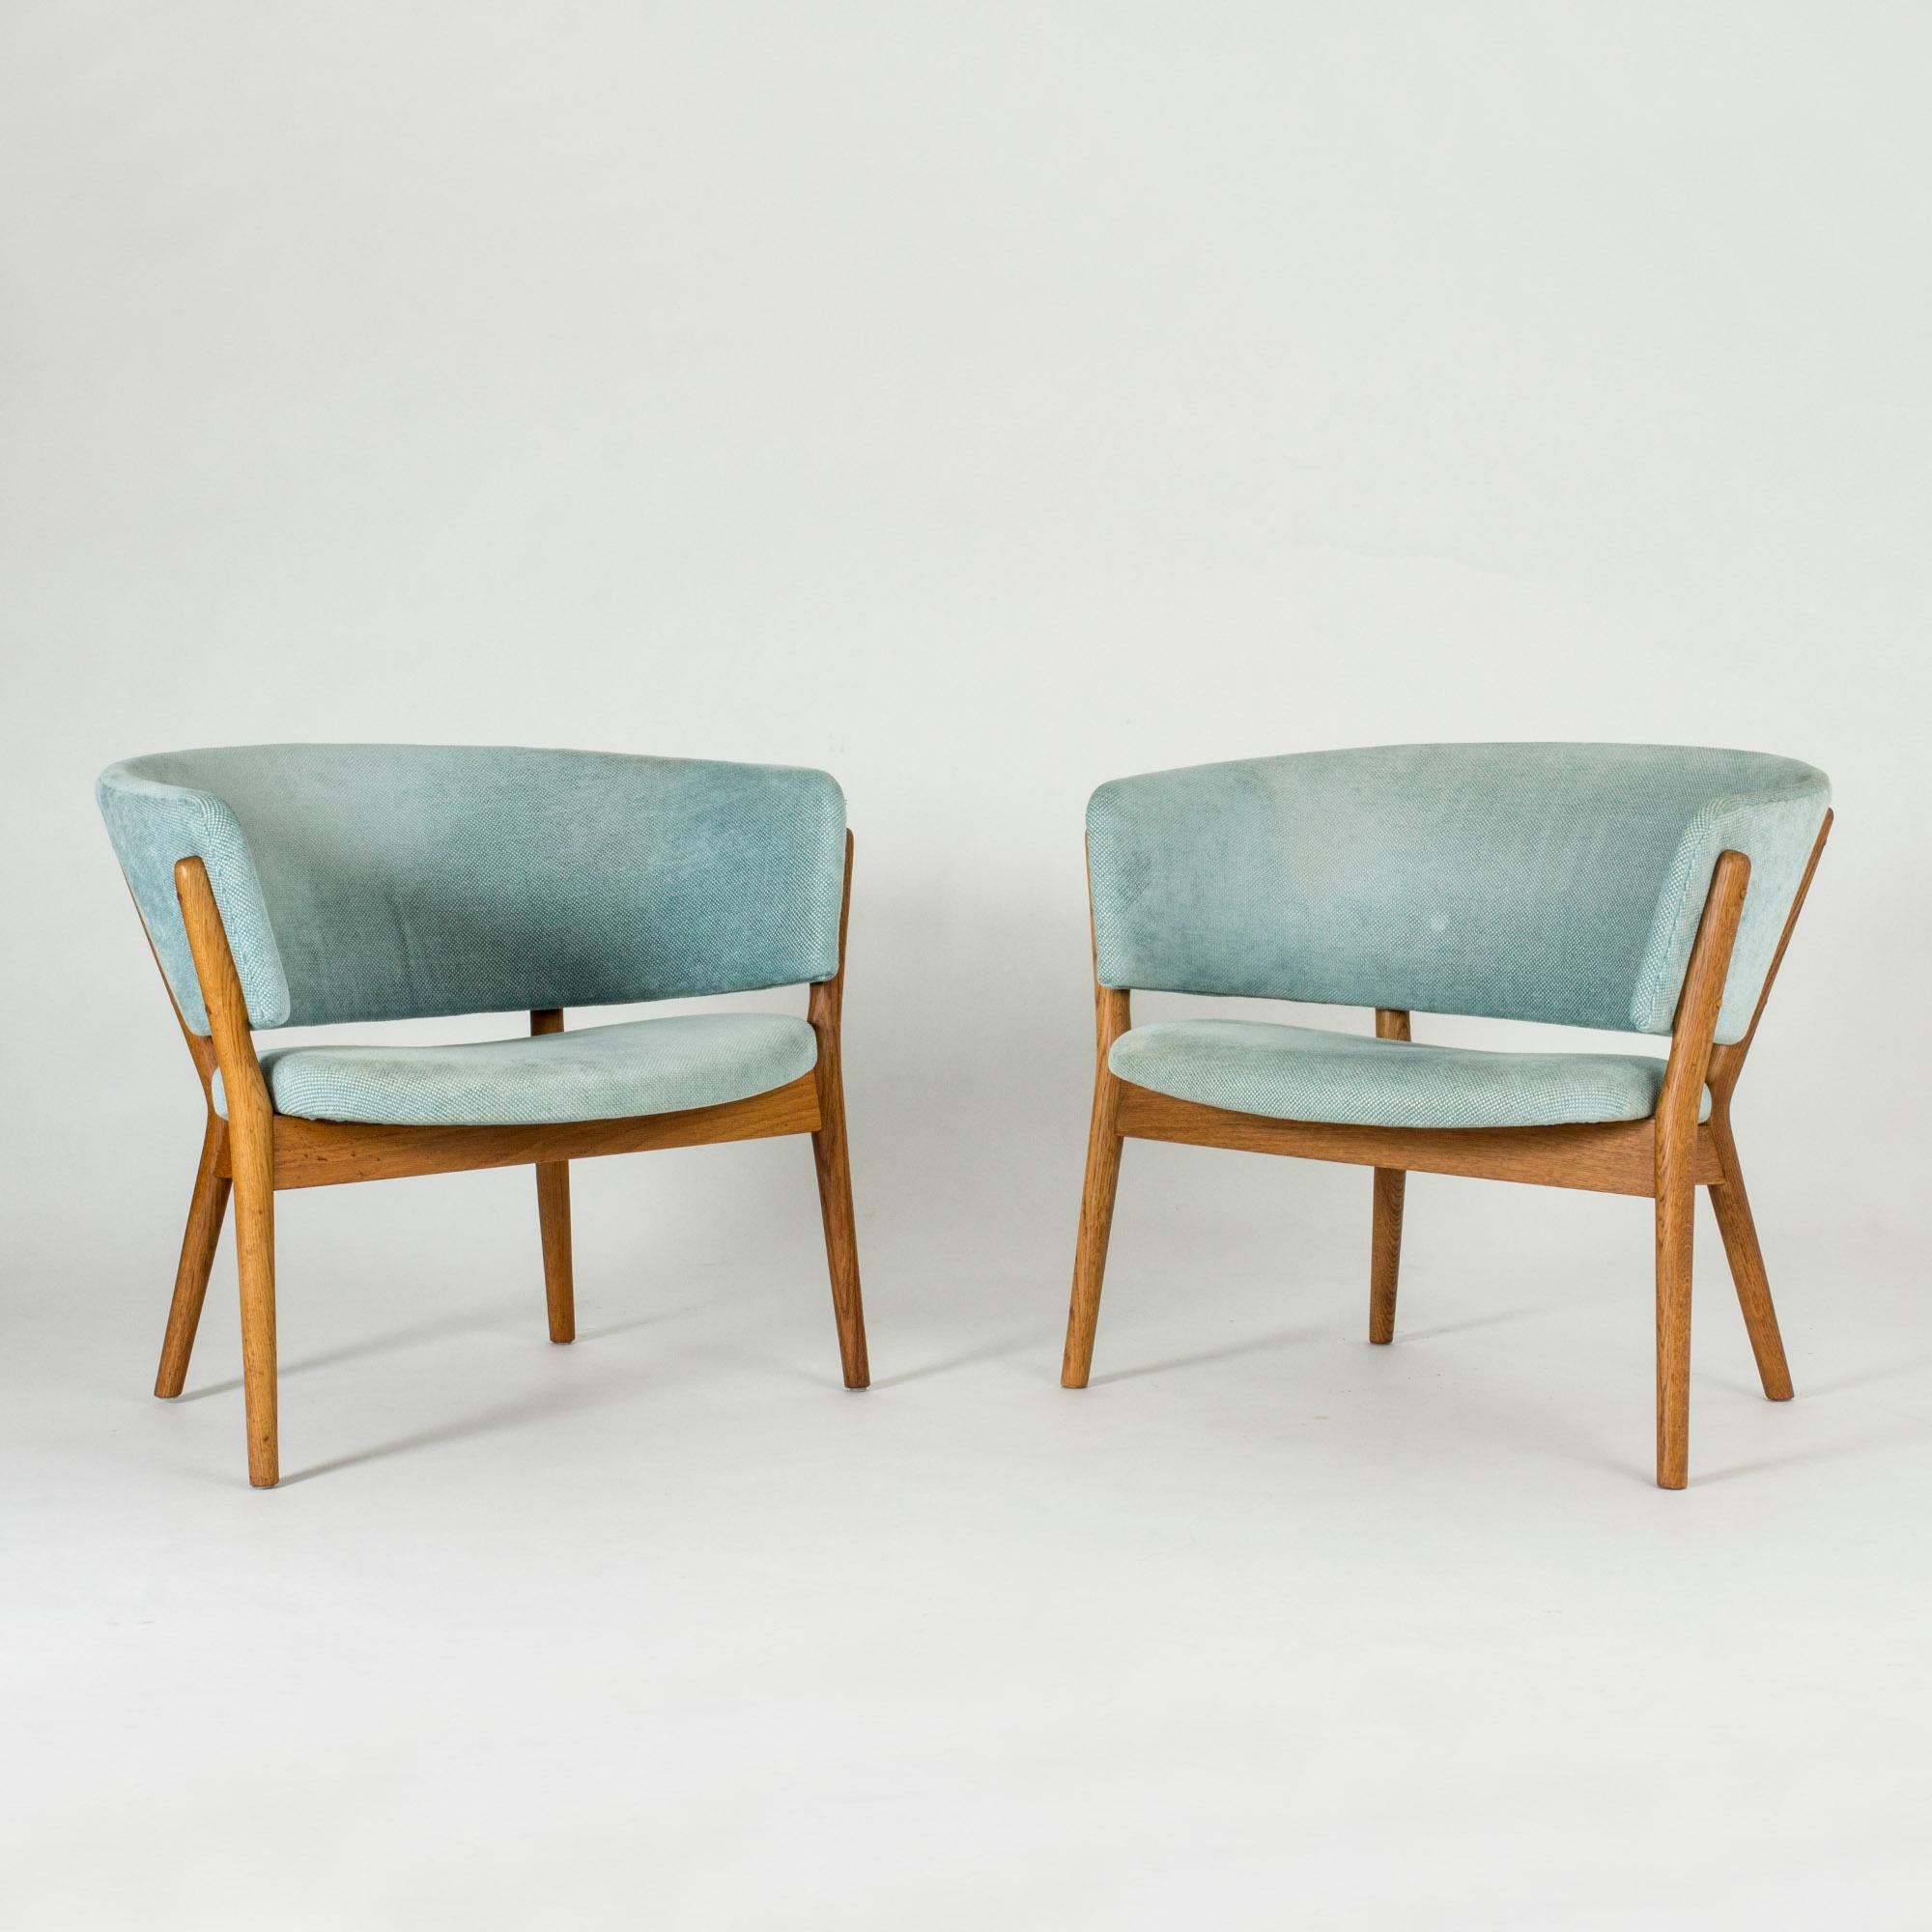 Pair of beautiful “ND 83” lounge chairs by Nanna Ditzel, designed in 1952. Frames made of solid oak, upholstered with a cool aquamarine colored vintage fabric. The elegant simplicity and inviting design are characteristic of Nanna Ditzel’s style.